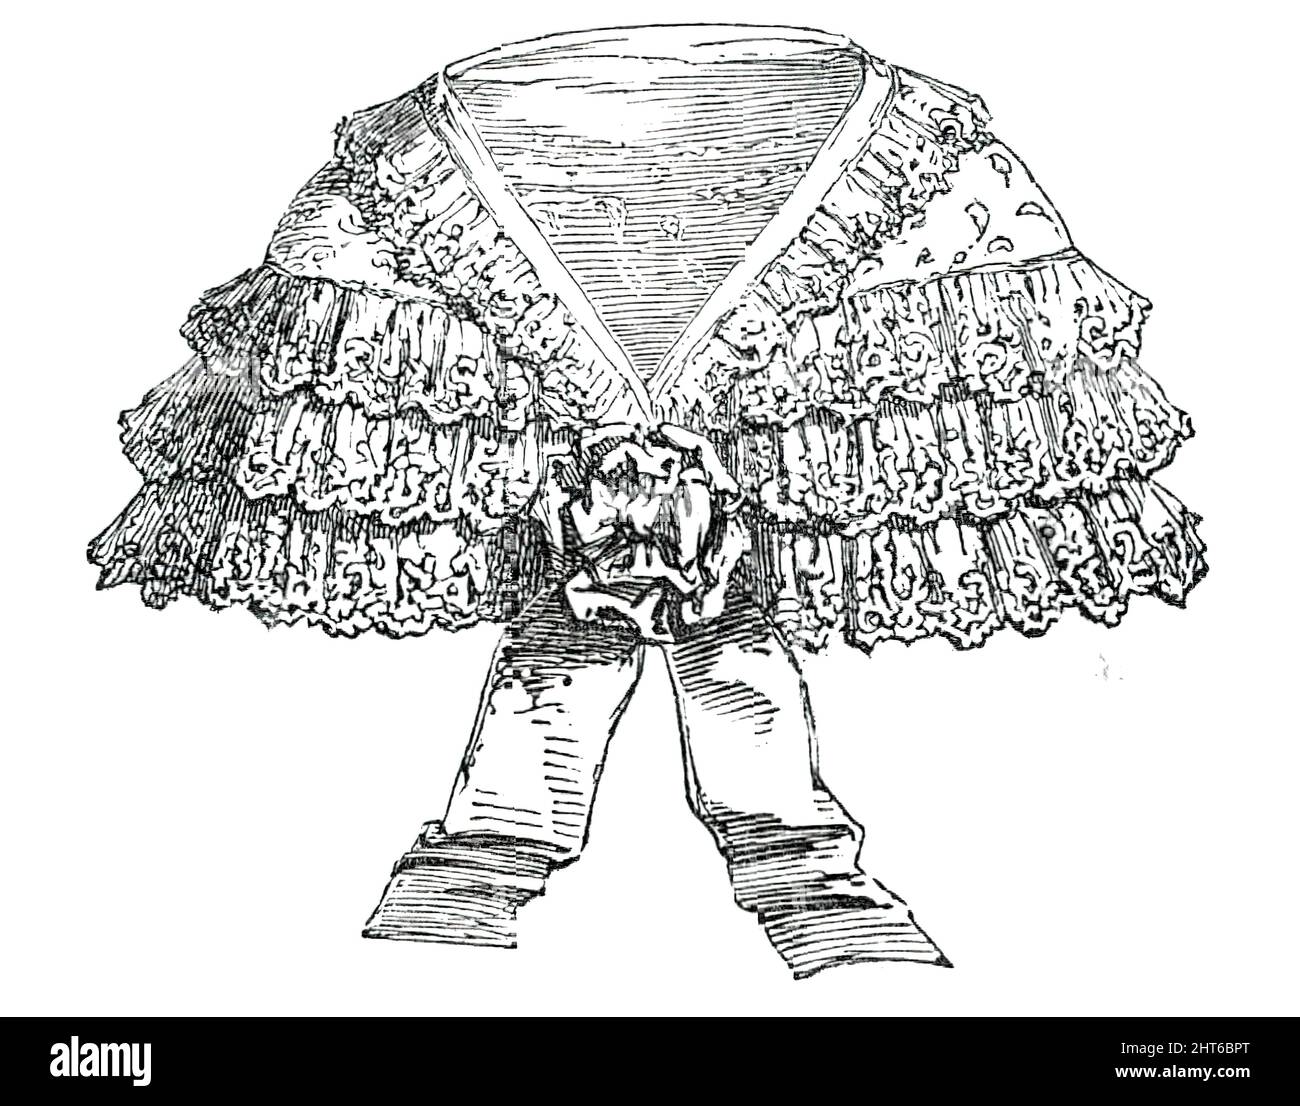 Paris Fashions for June - Pelerine, 1850. 'A Pelerine of embroidered net, trimmed with three rows of point d'Alen&#xe7;on [lace], and ornamented with a large knot of ribbons Bayad&#xe8;re. From &quot;Illustrated London News&quot;, 1850. Stock Photo